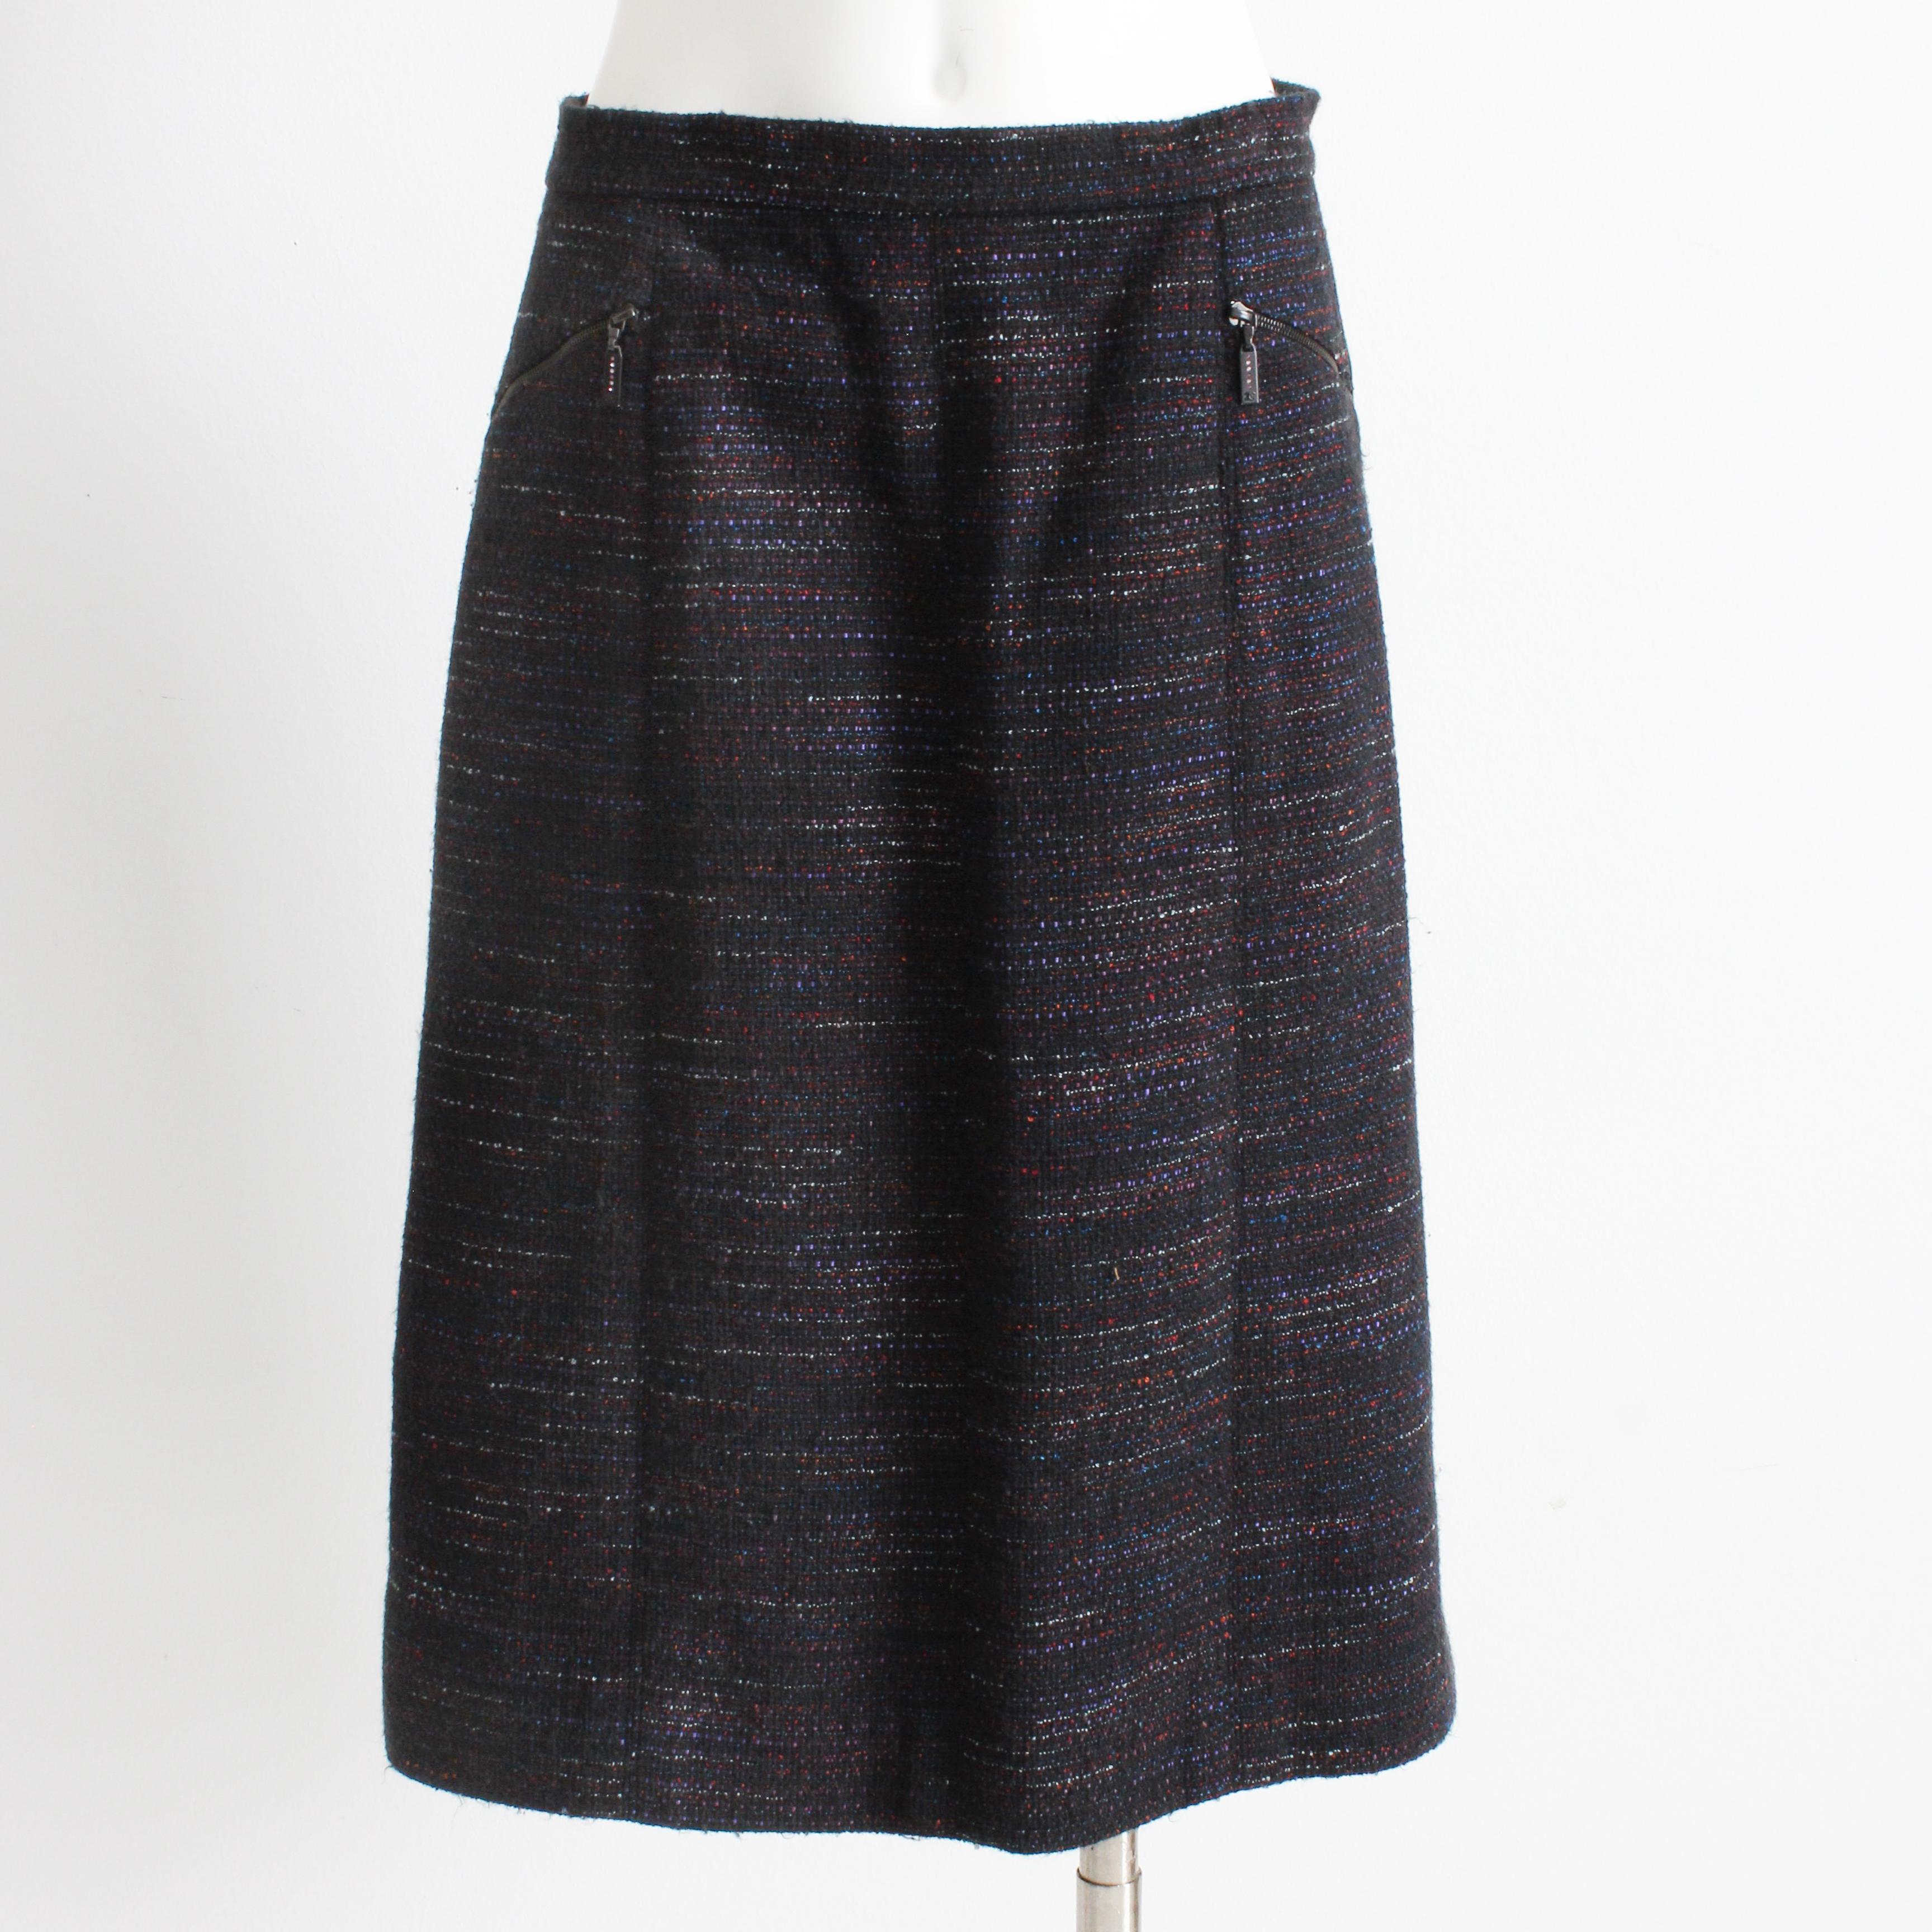 Women's Chanel Skirt Multicolor Cotton Blend Tweed Pencil Style 02A Collection Size 40 For Sale